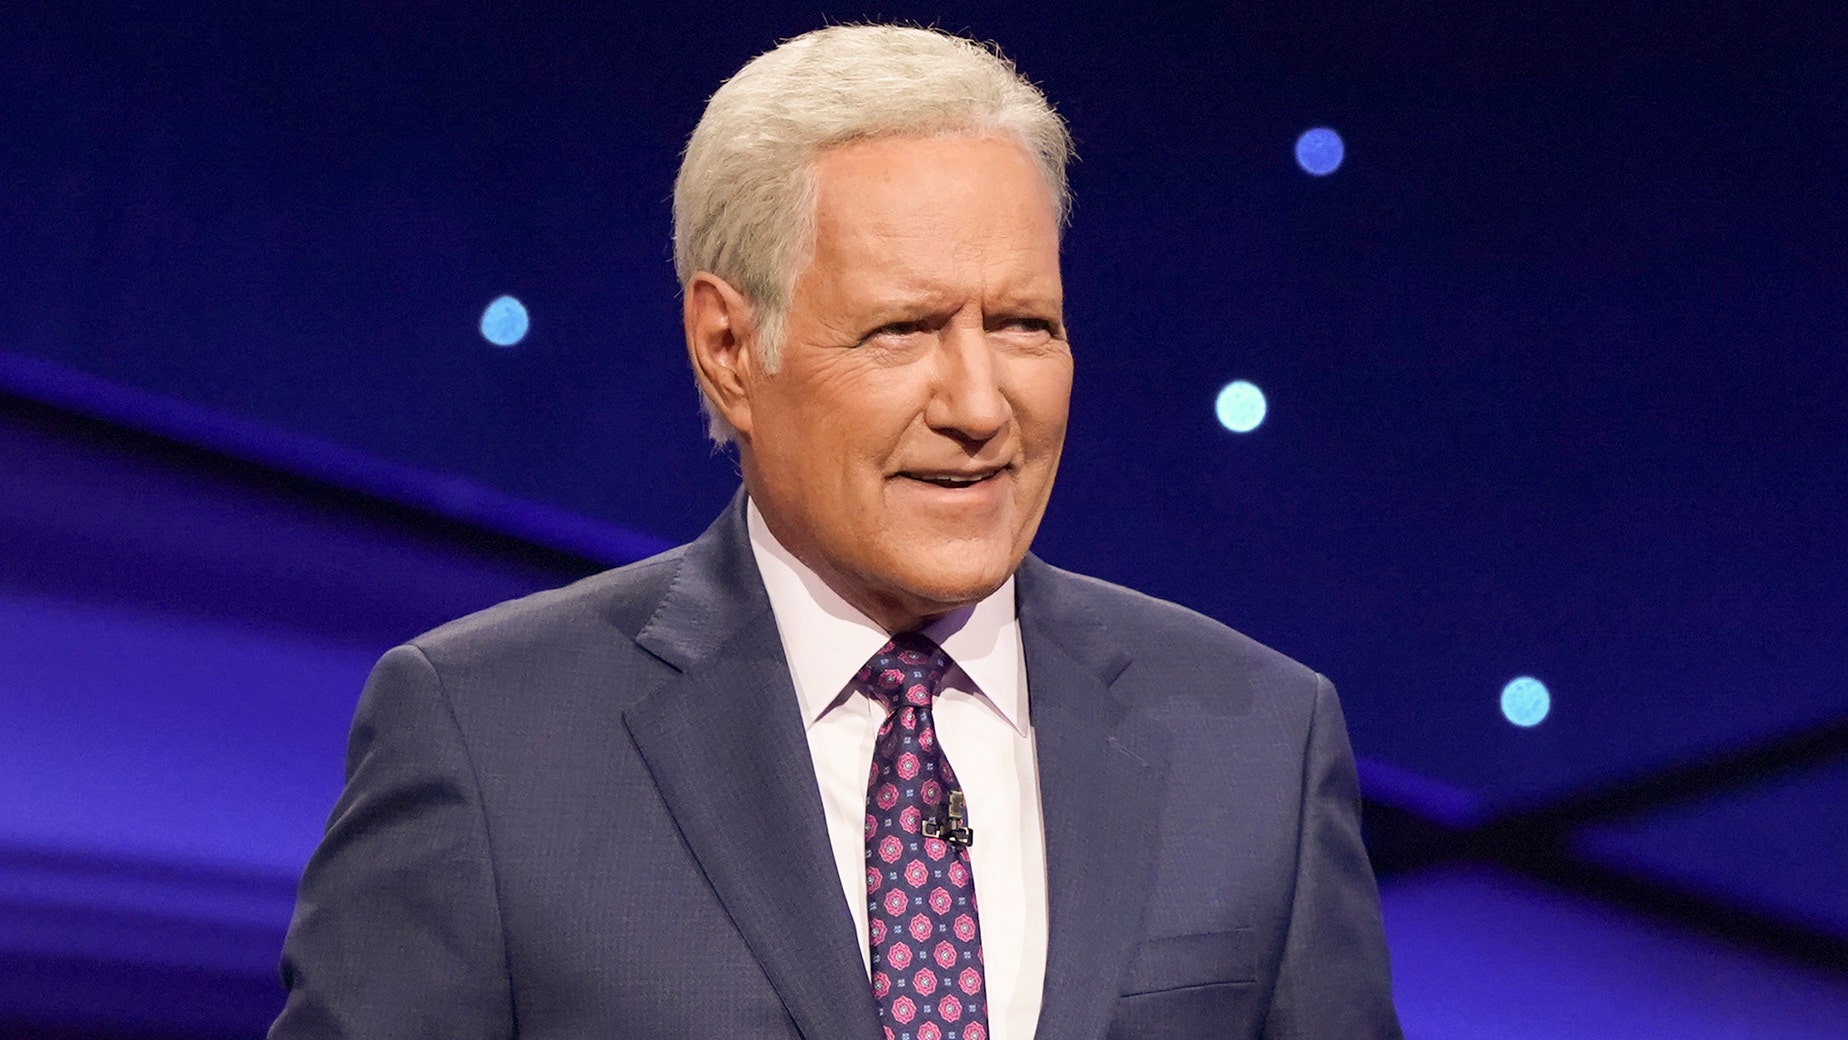 Alex Trebek’s daughter praises the late ‘Jeopardy’ host after his last episode: ‘You were exceptional’